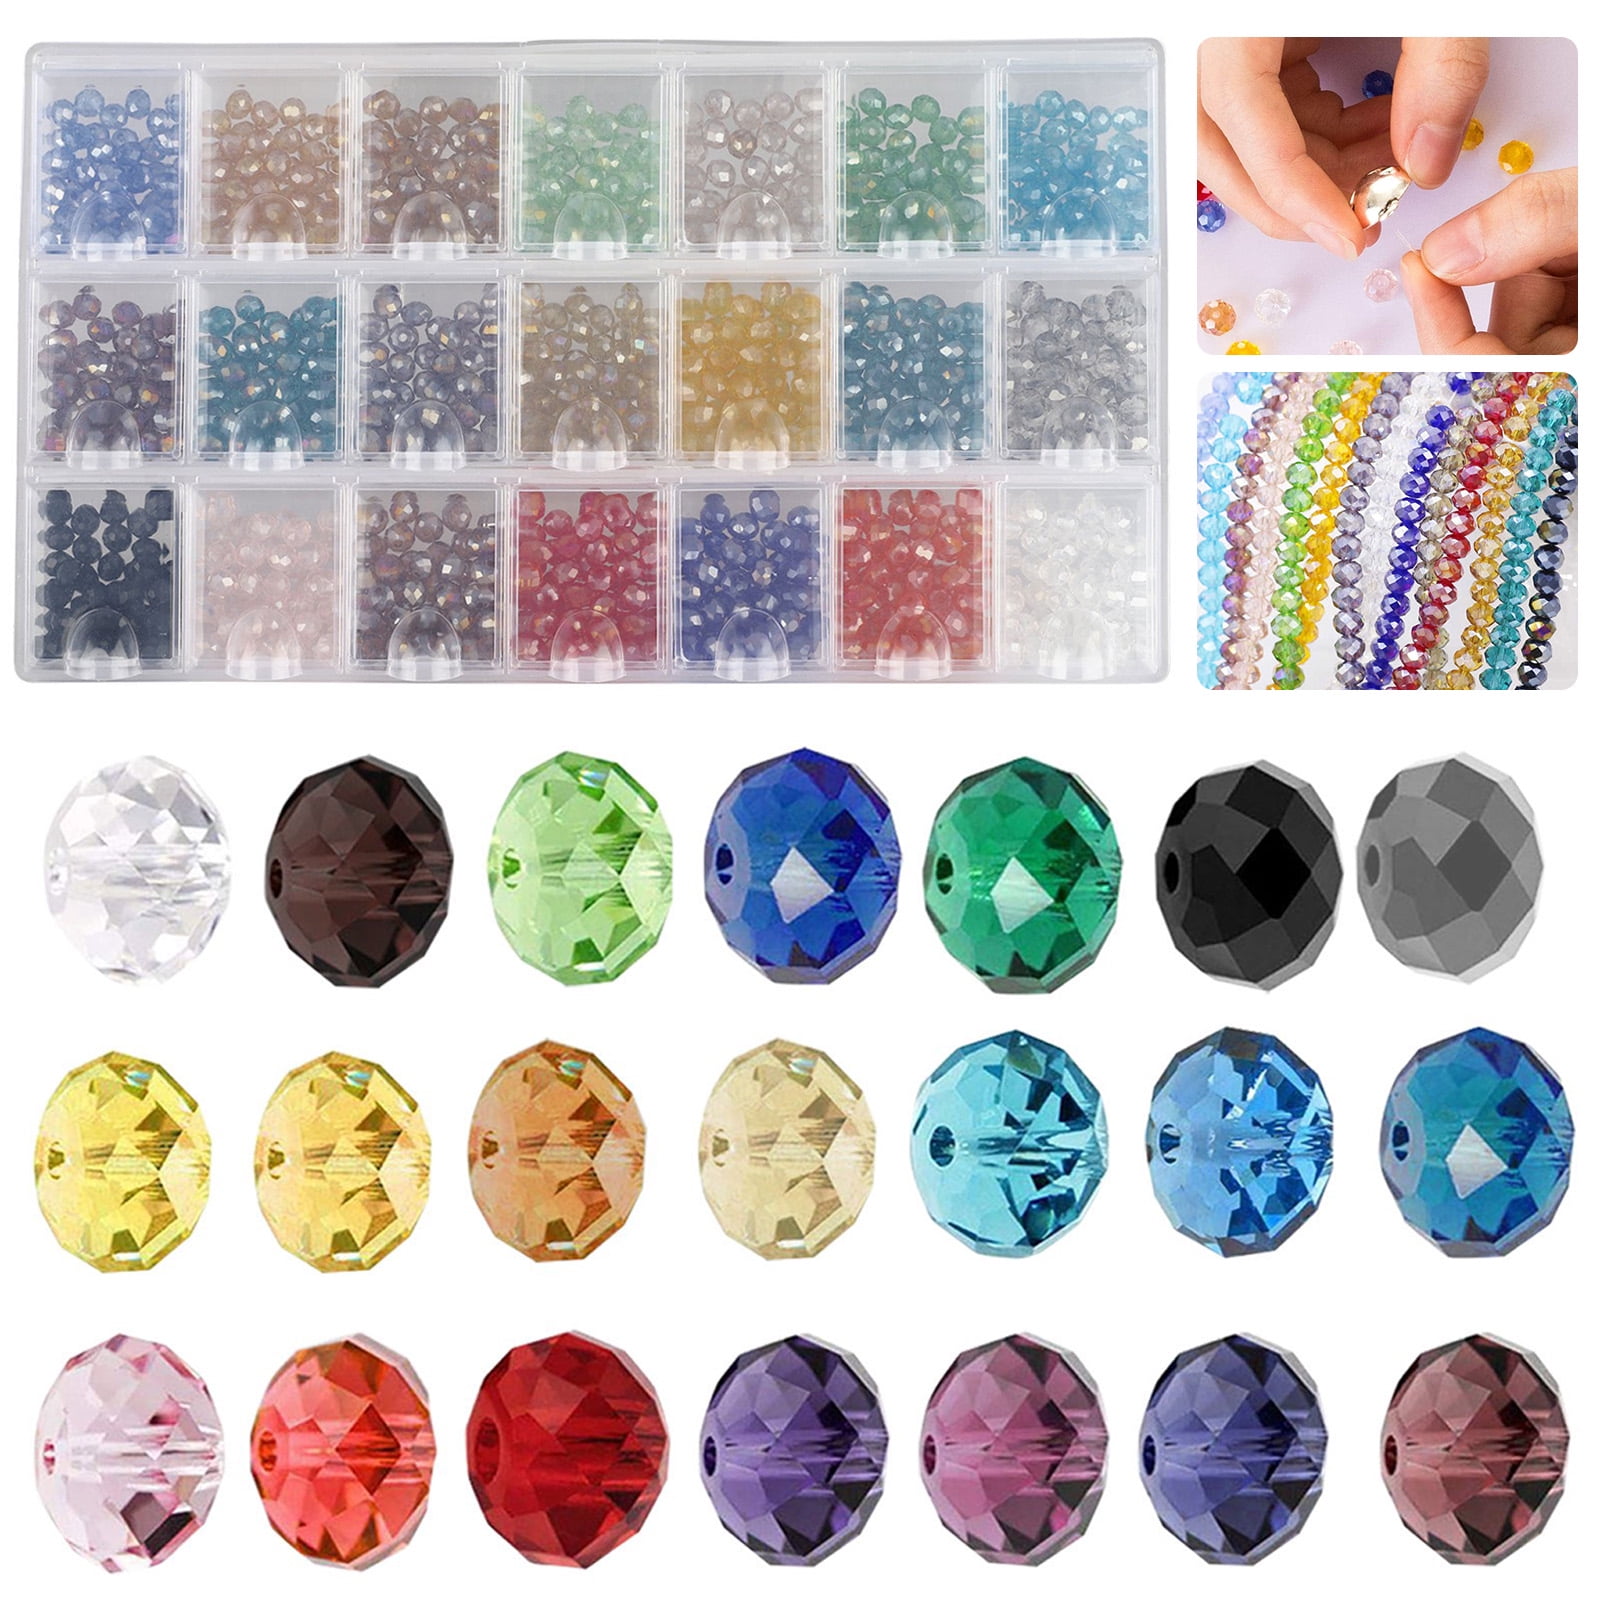 100pieces Colorful Roundel Beads with Crystals Jewelry Christmas Gifts 6mm 